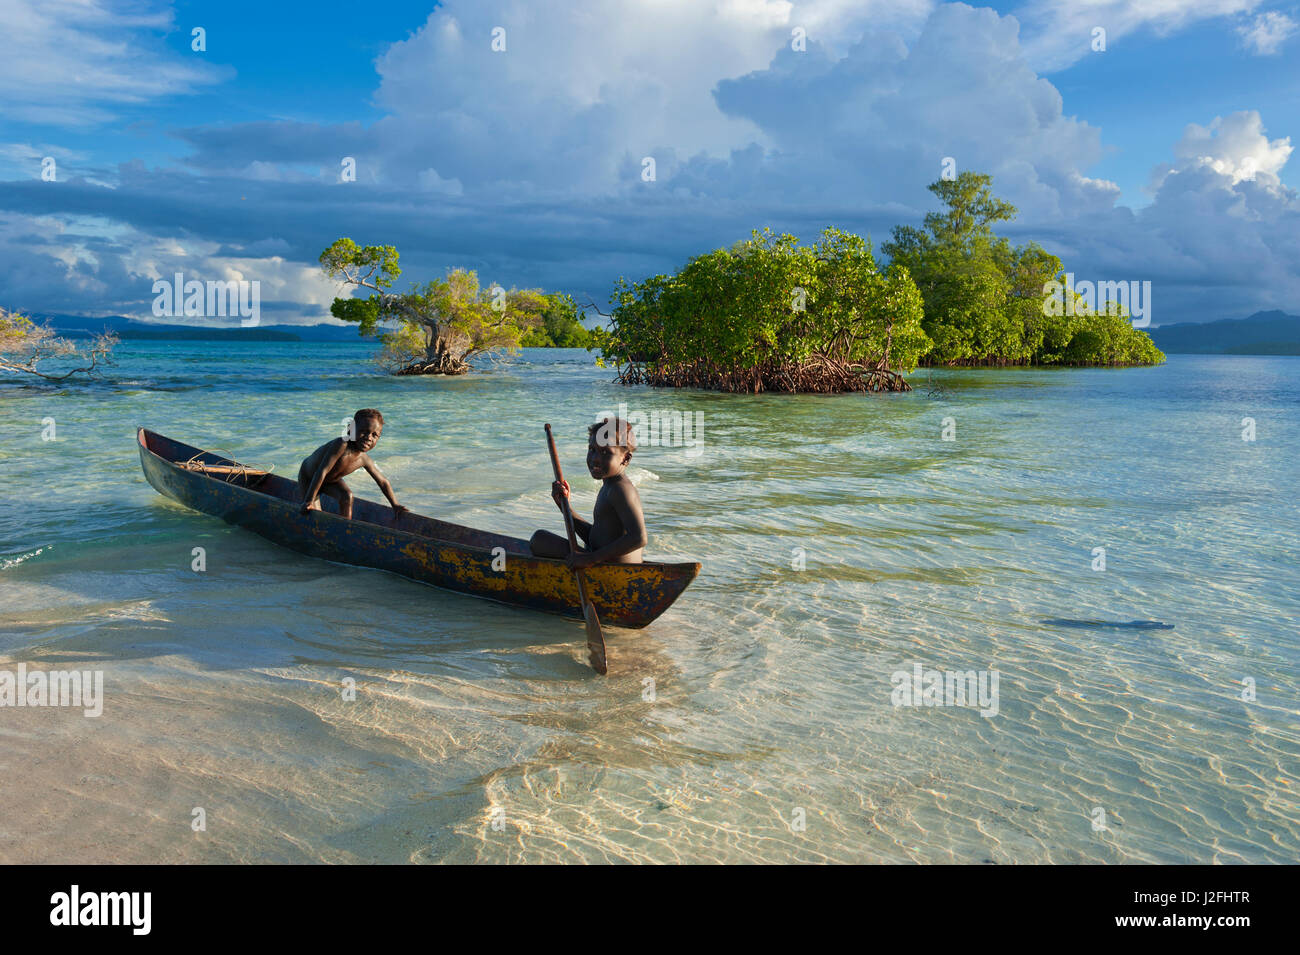 Young boys fishing in the Marovo Lagoon before dramatic clouds, Solomon Islands, Pacific Stock Photo